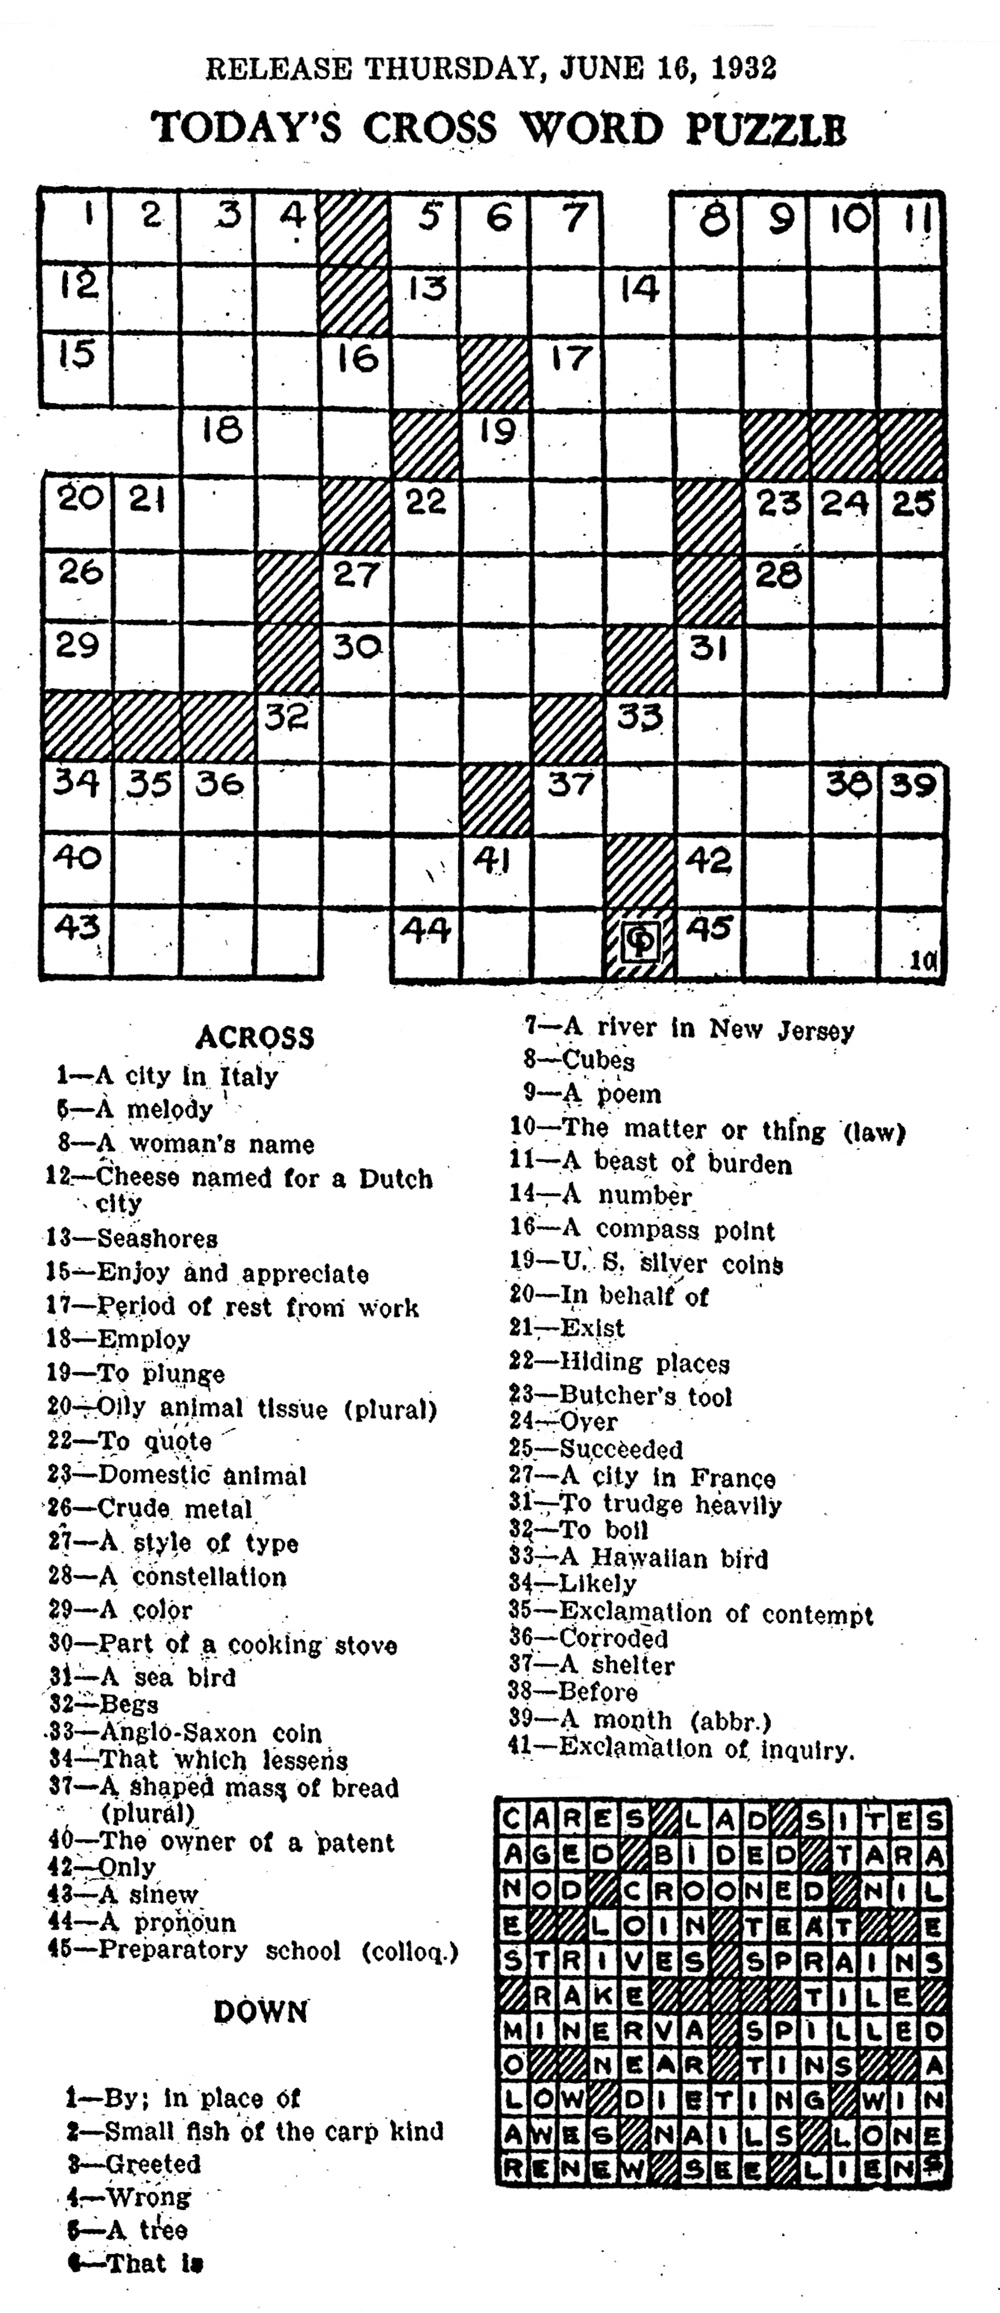 Daily Cryptic Crossword Puzzles For You To Play Now Printable 